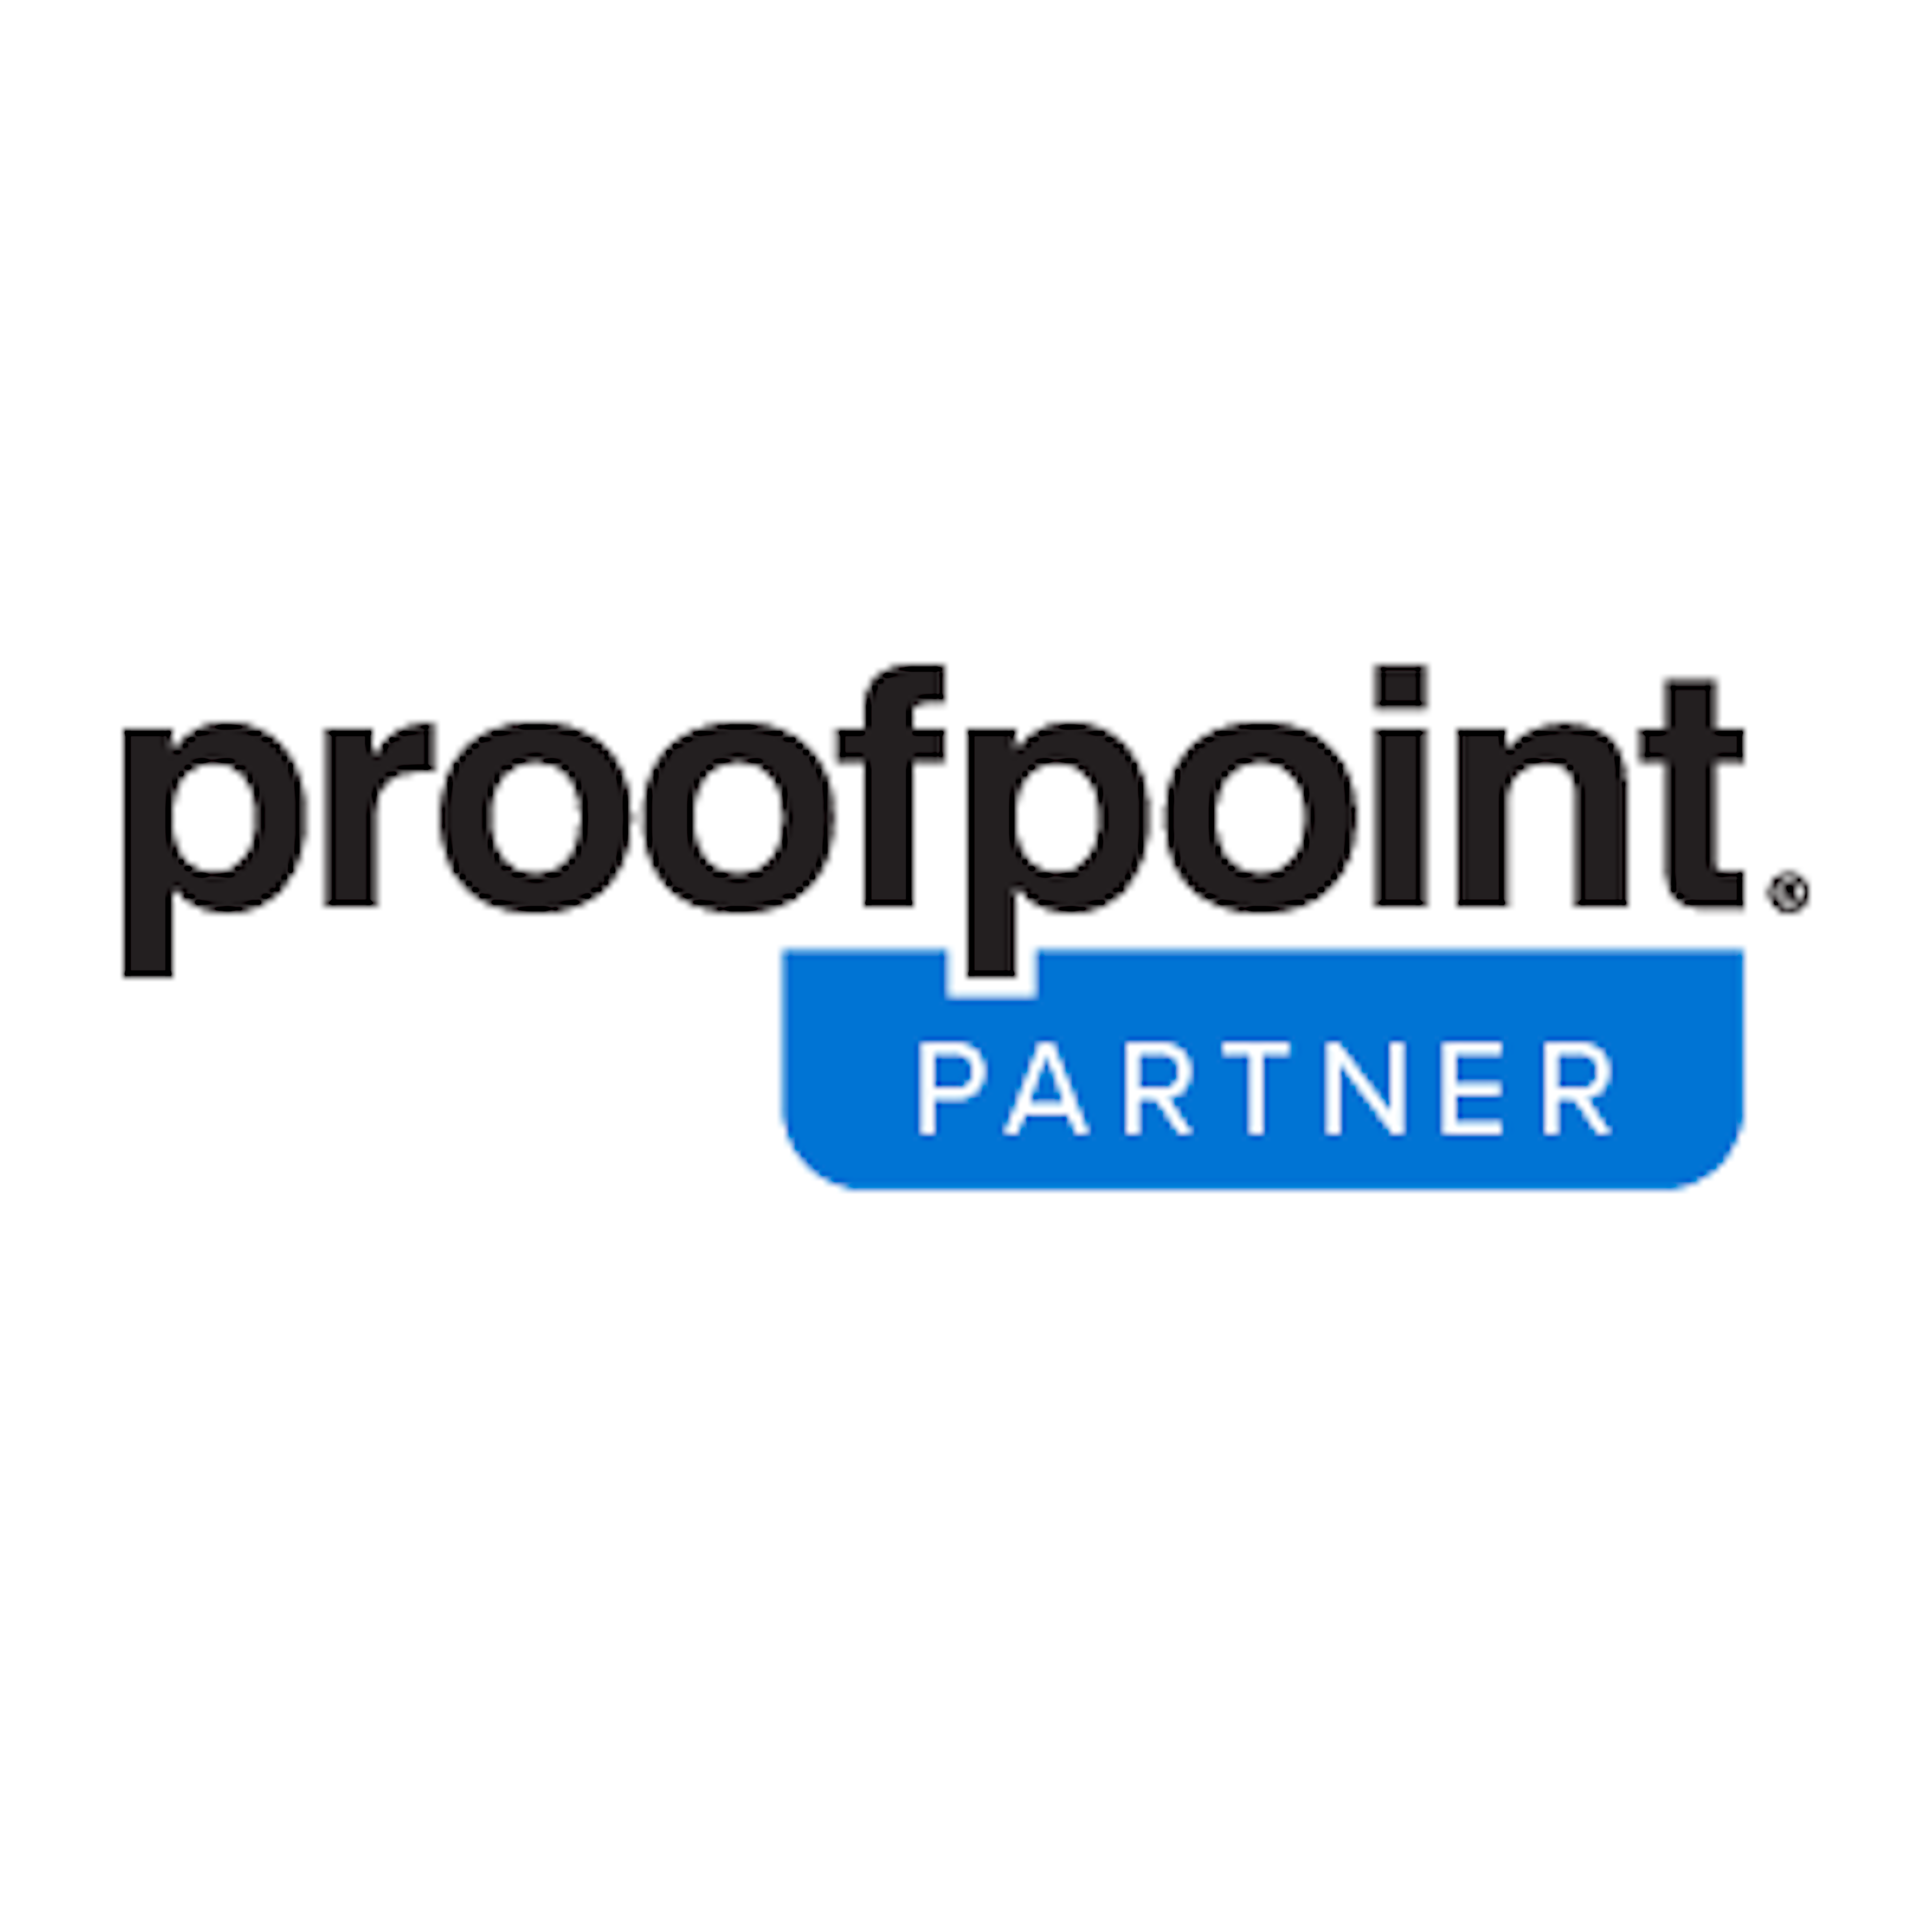 Official Proofpoint Partner